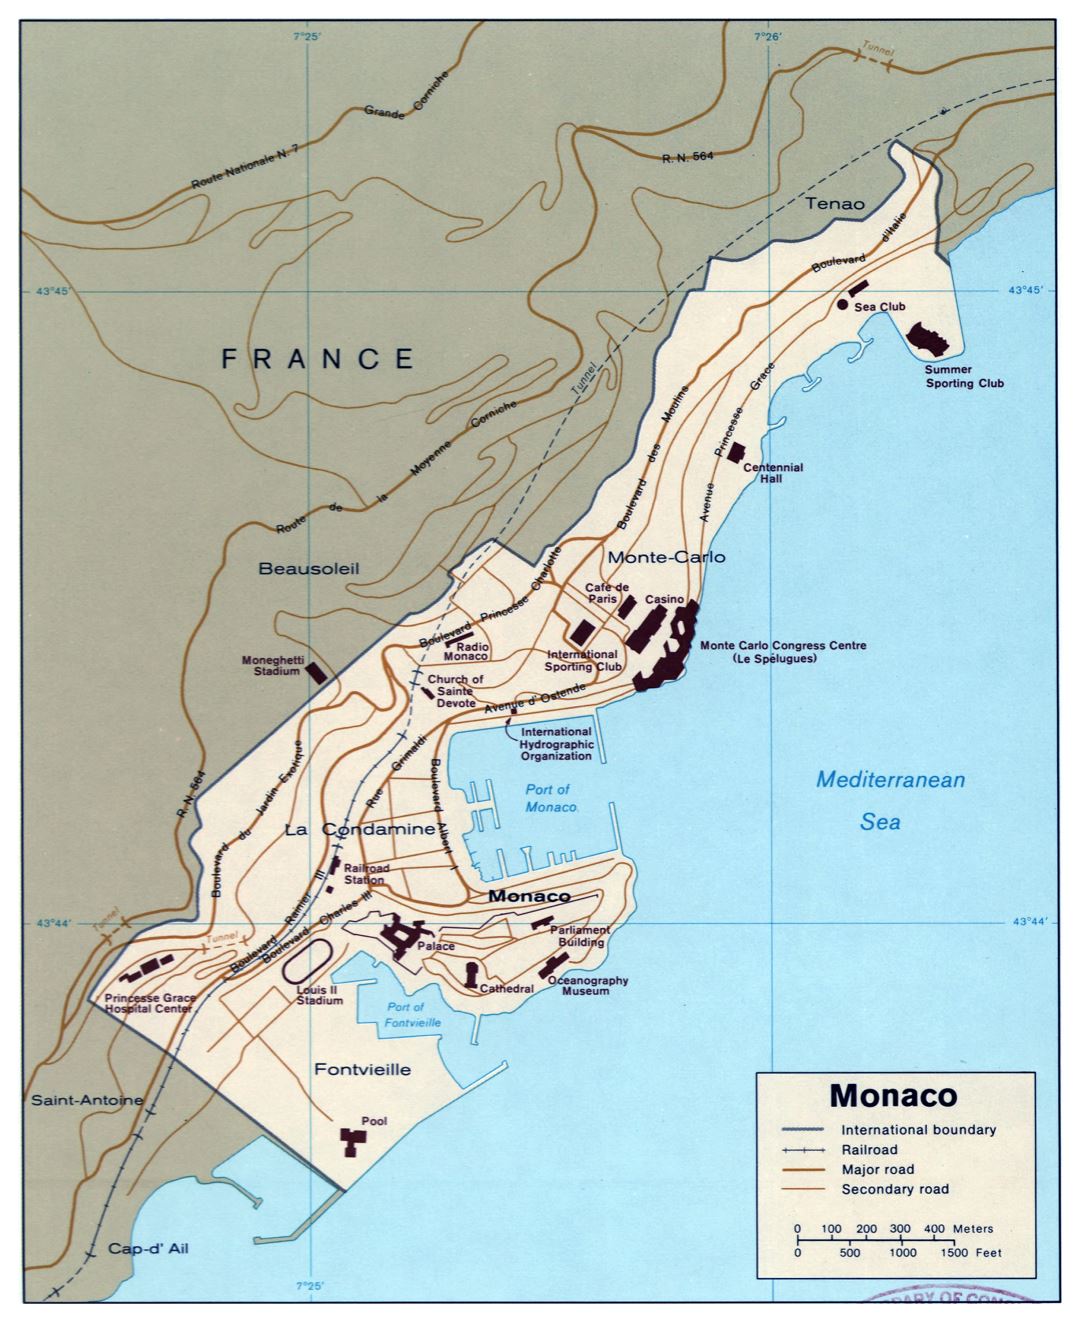 Large scale political map of Monaco with roads and railroads